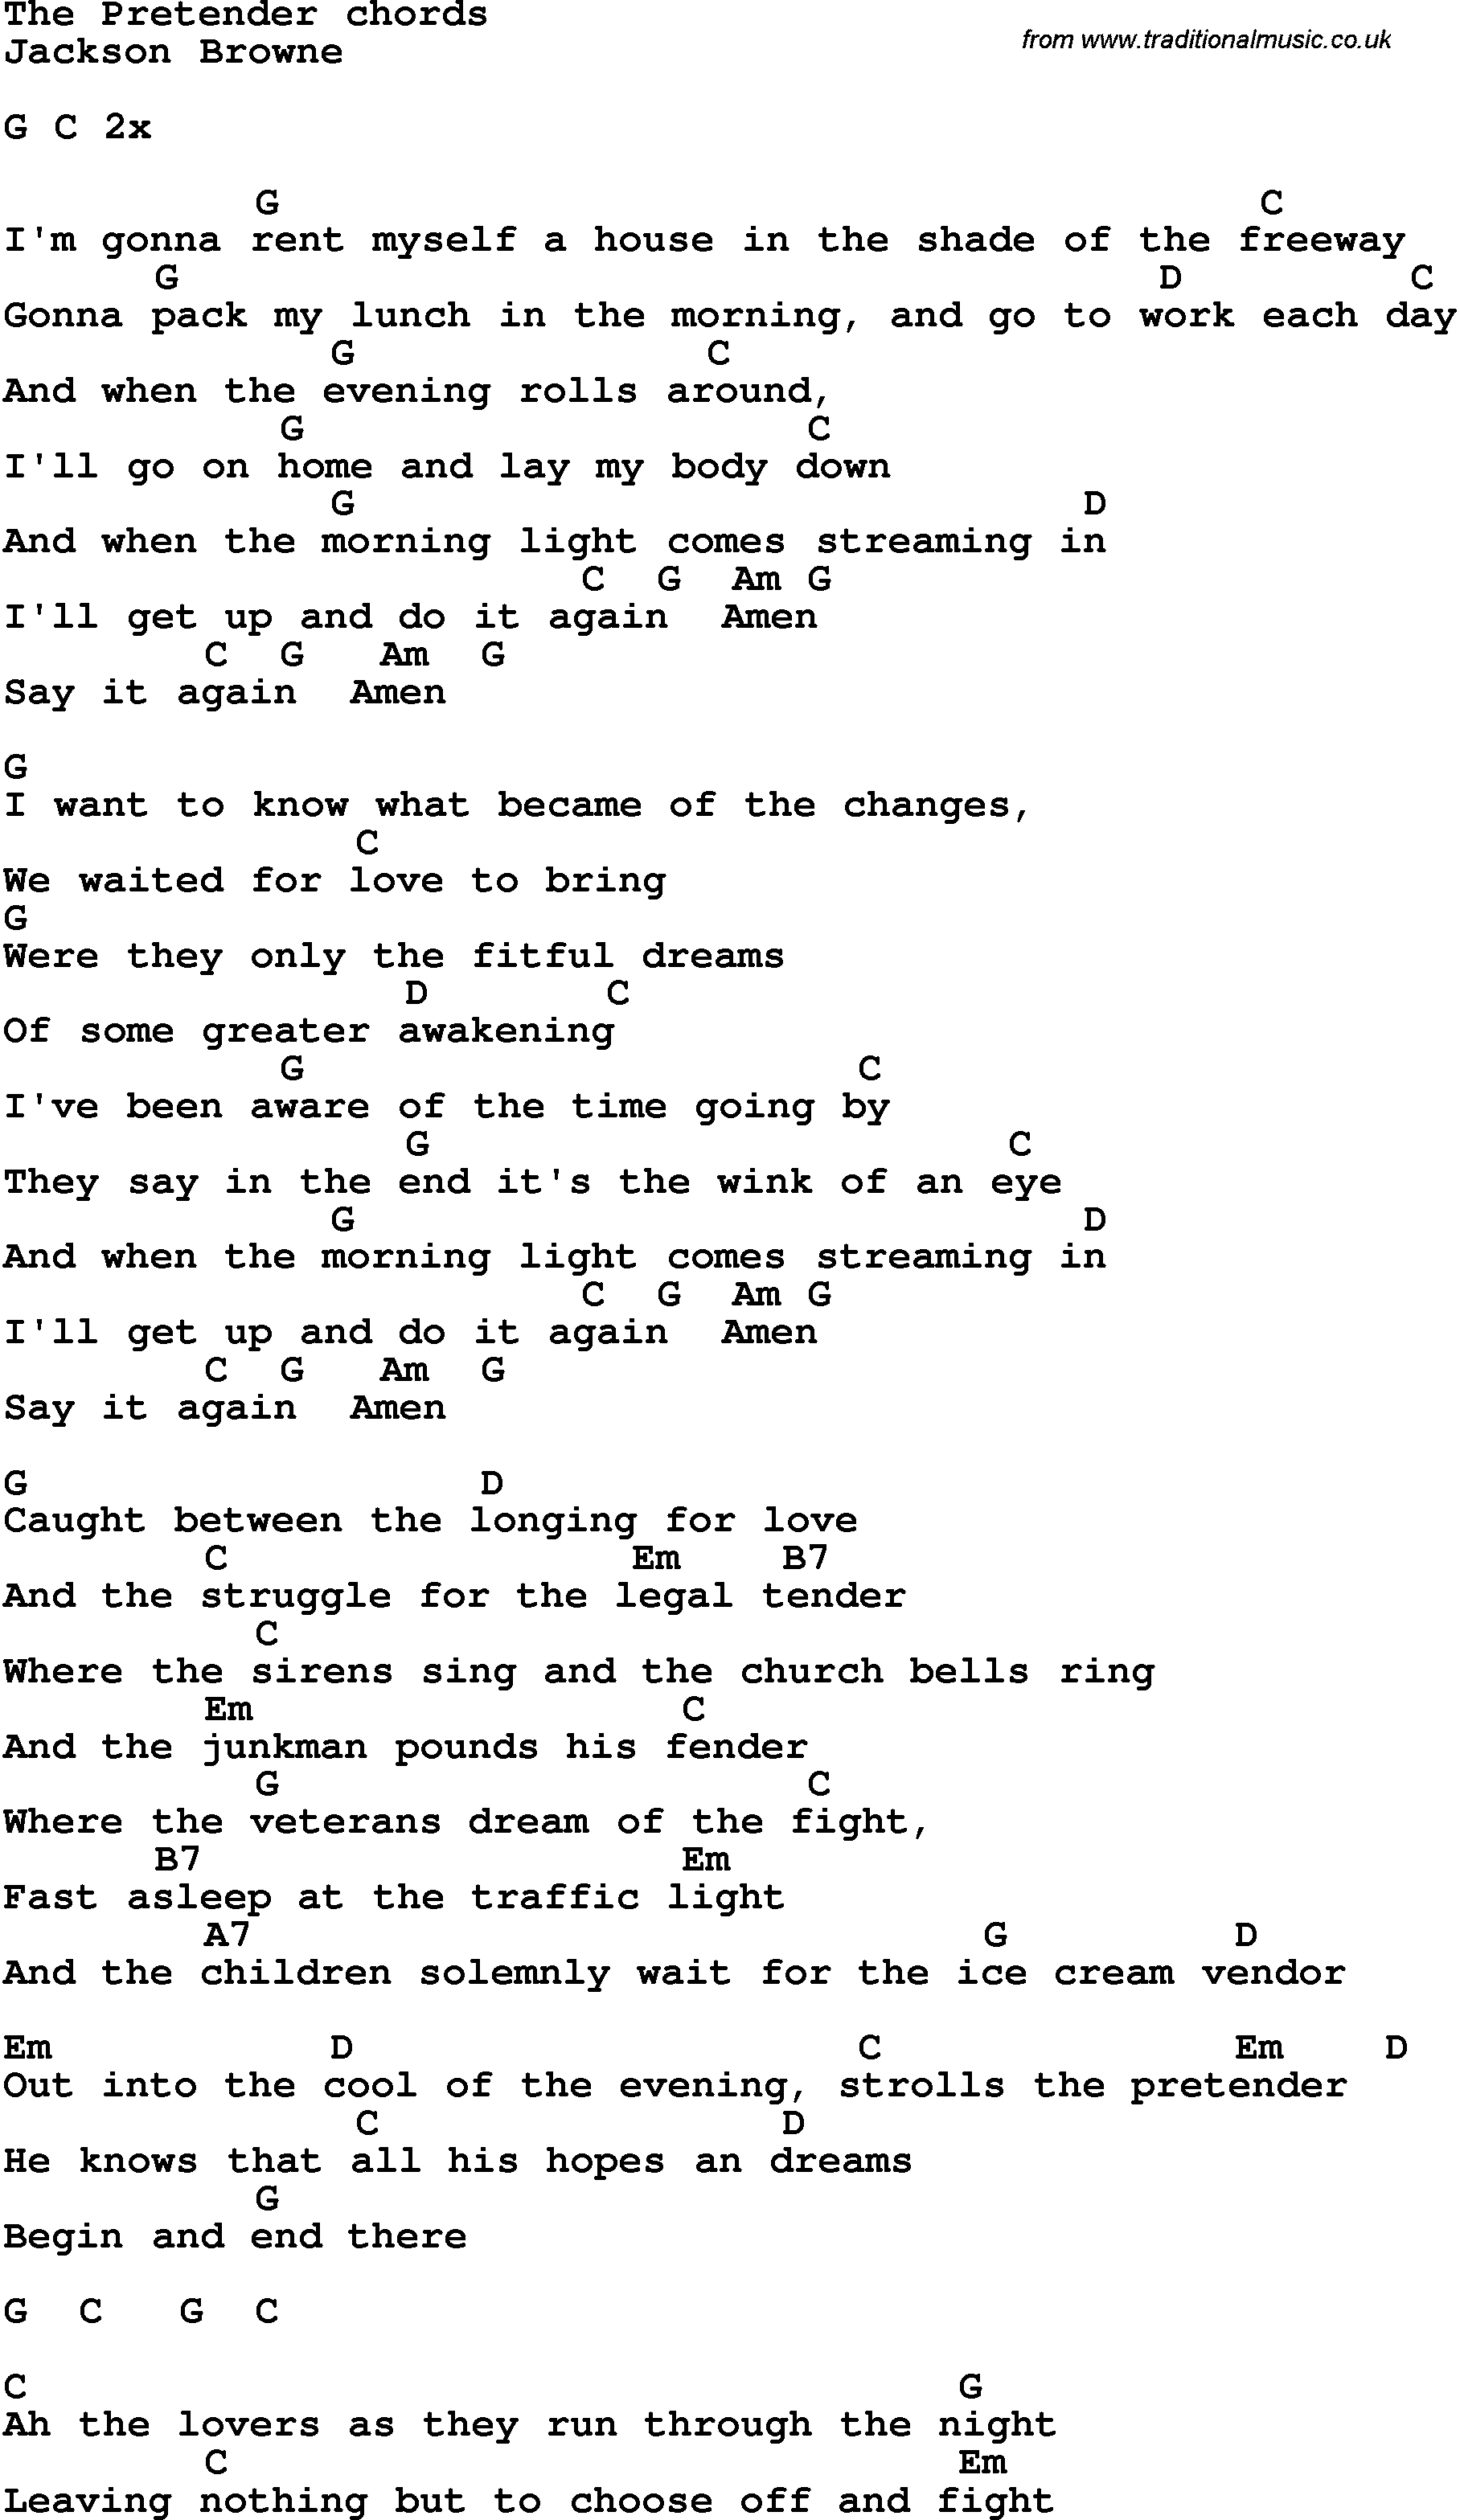 Song Lyrics with guitar chords for The Pretender - Jackson Browne